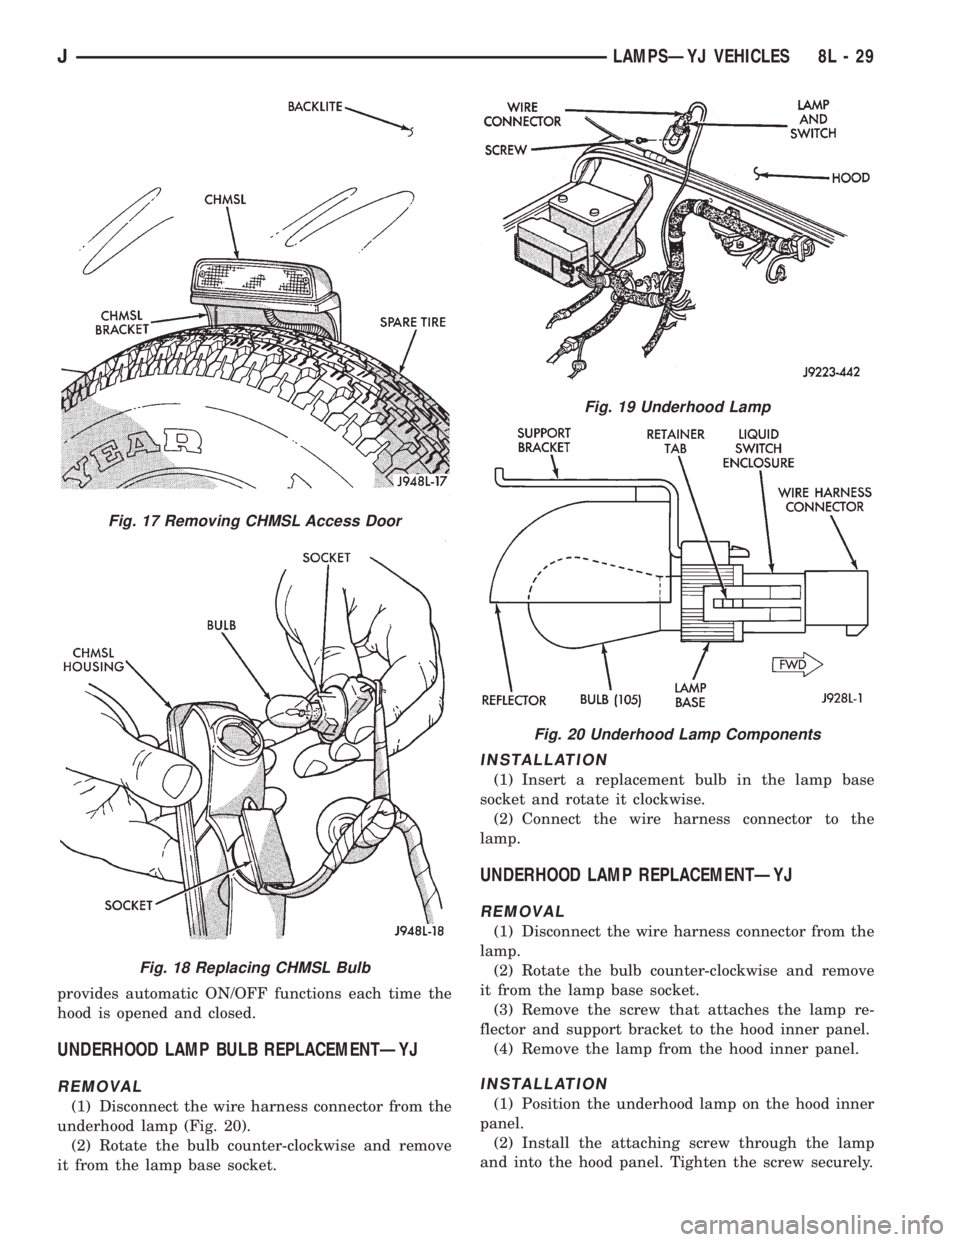 JEEP YJ 1995  Service And Repair Manual provides automatic ON/OFF functions each time the
hood is opened and closed.
UNDERHOOD LAMP BULB REPLACEMENTÐYJ
REMOVAL
(1) Disconnect the wire harness connector from the
underhood lamp (Fig. 20).
(2